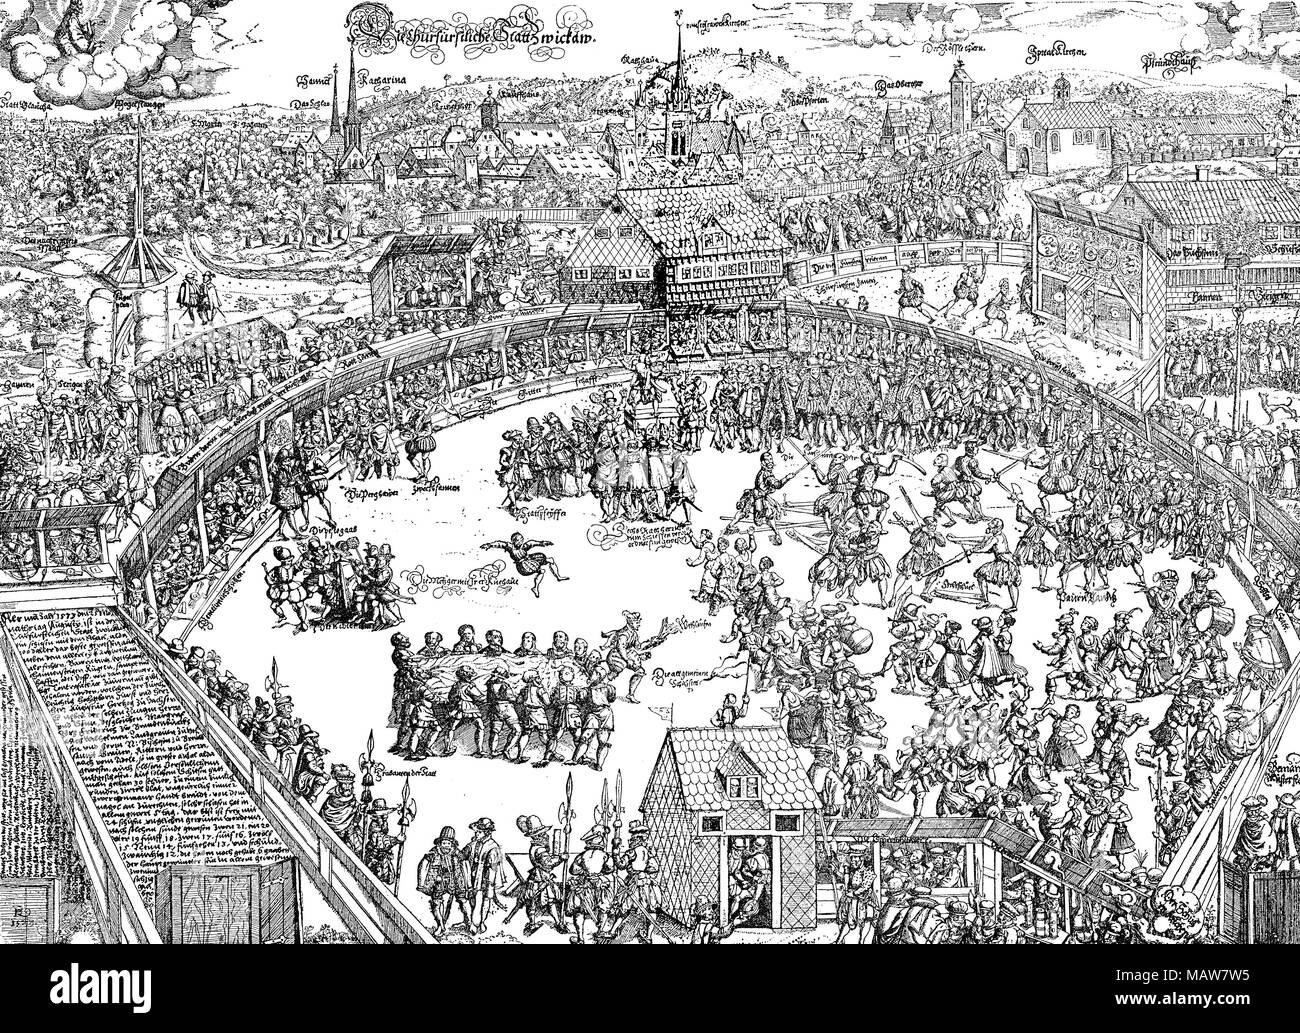 Middle Ages leasure time: the Zwickau shooting festival in 1573, vintage engraving Stock Photo